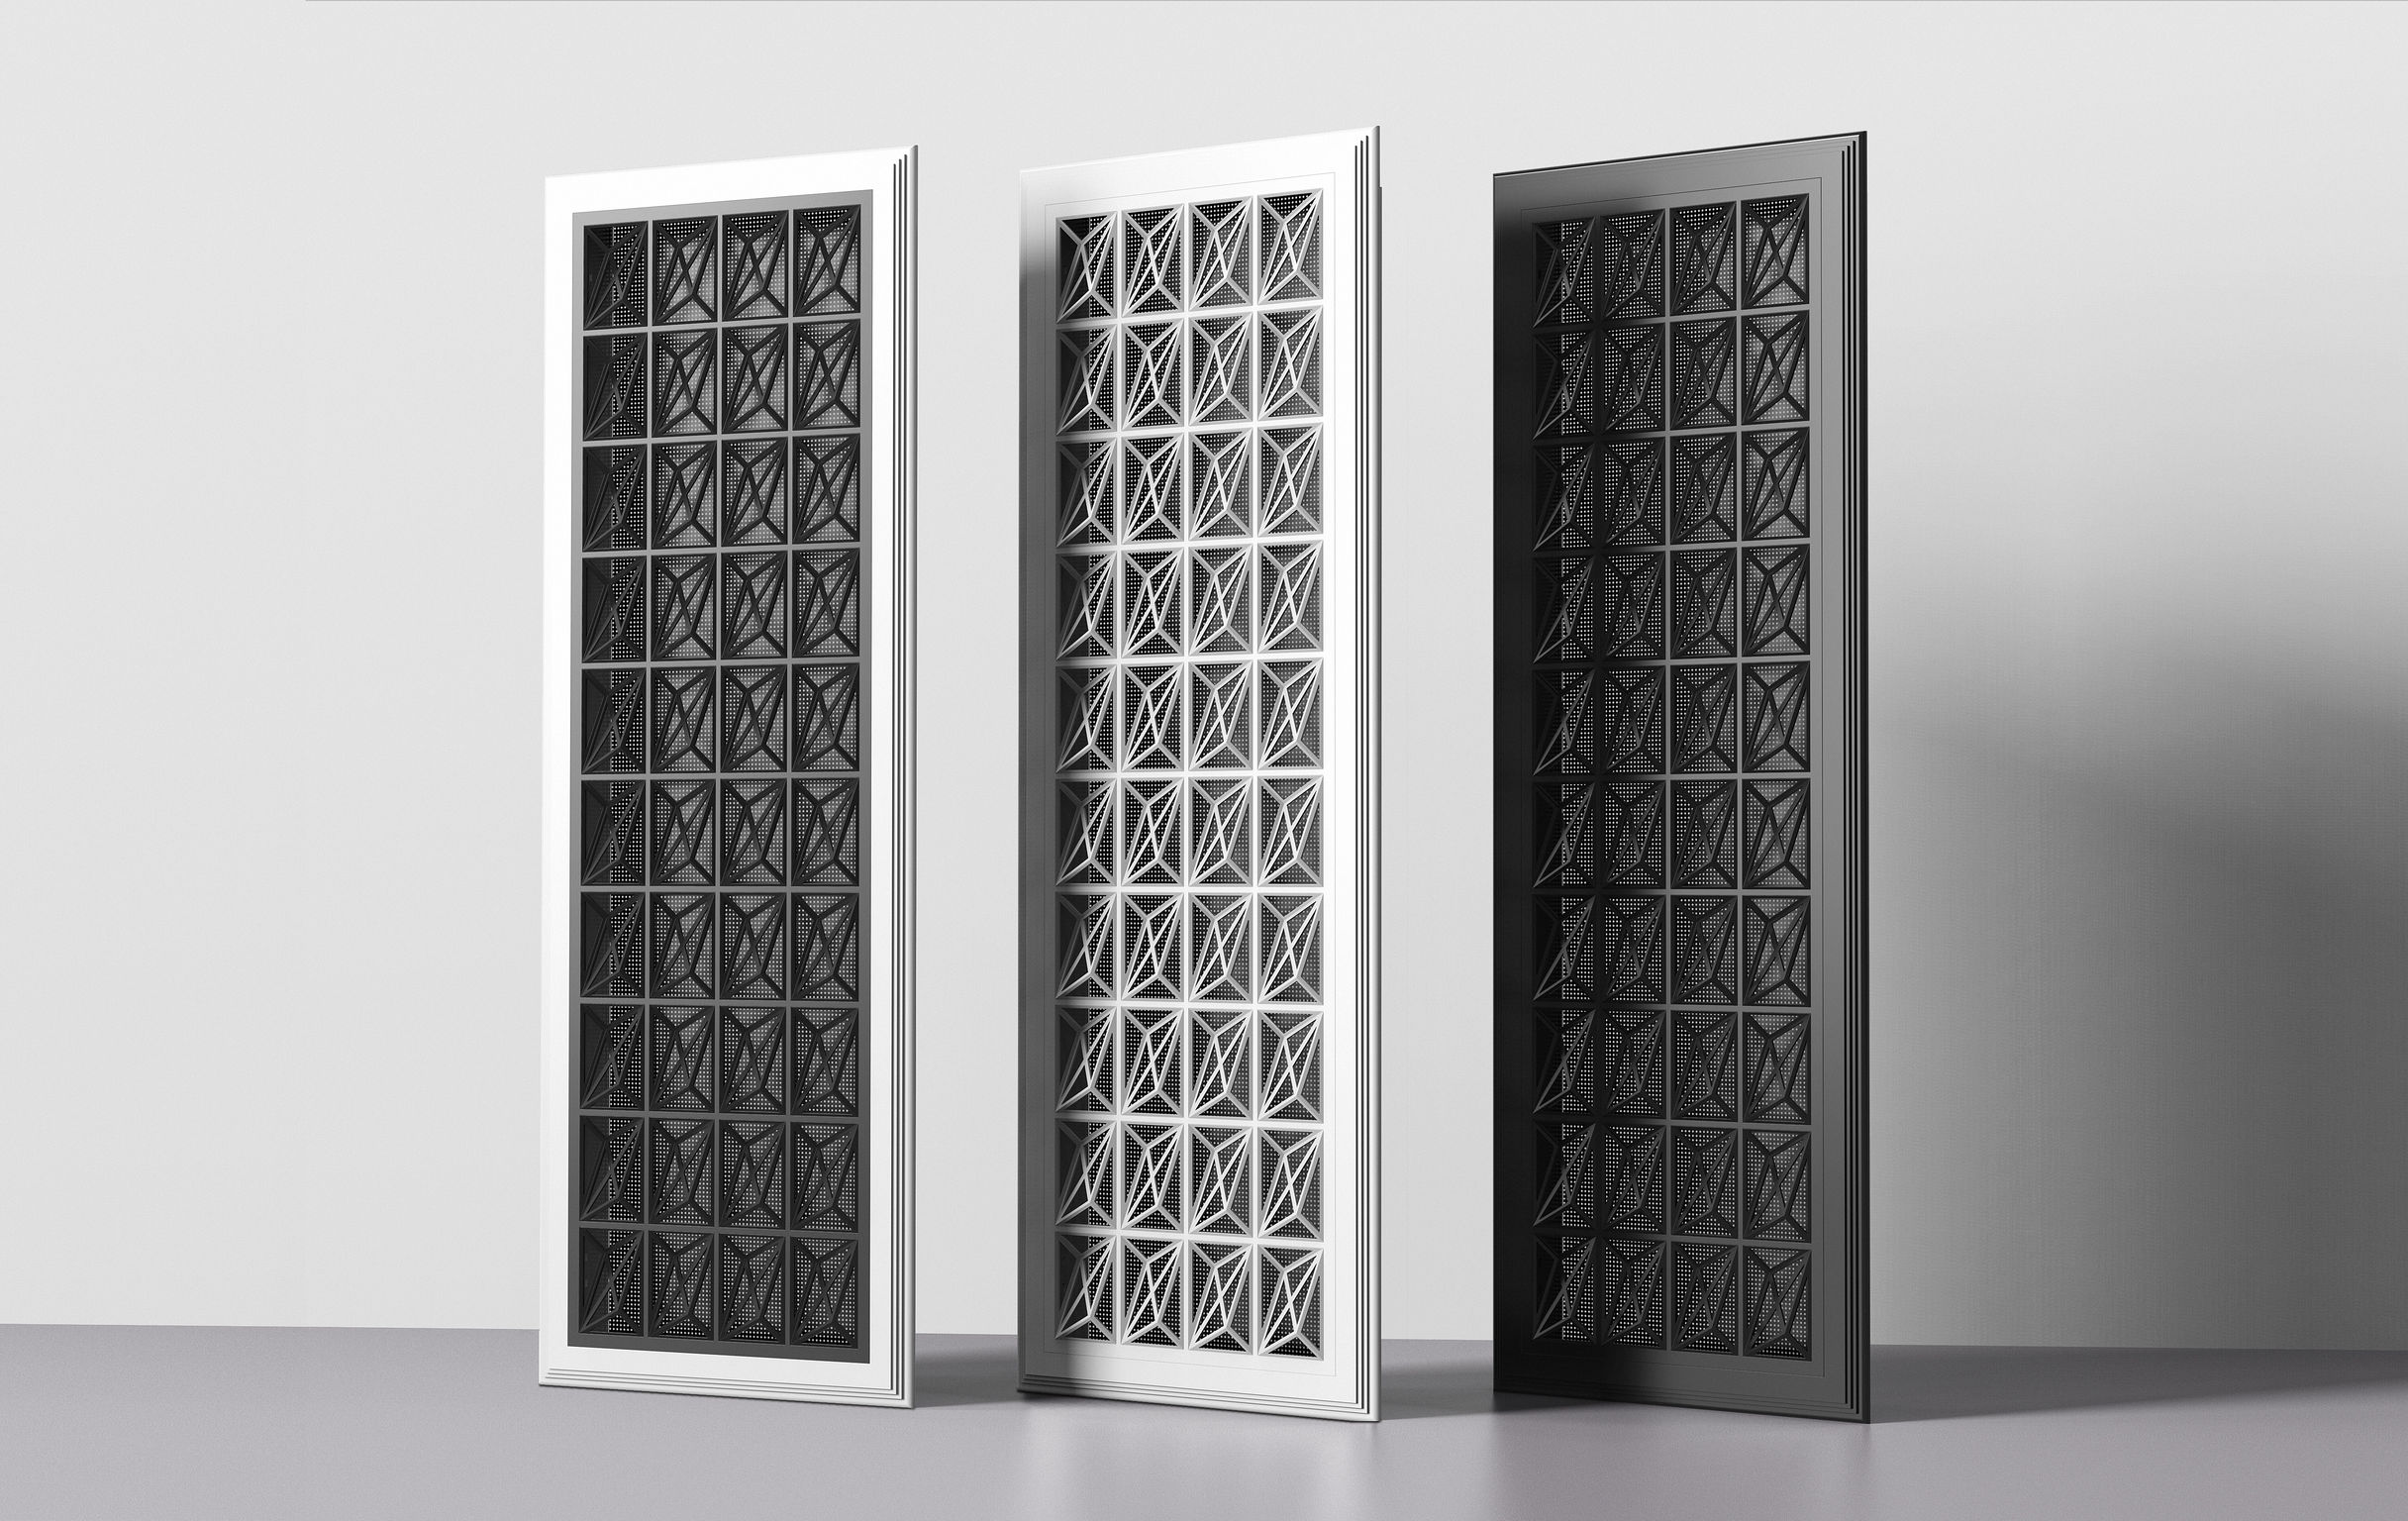 3D central air conditioning vent